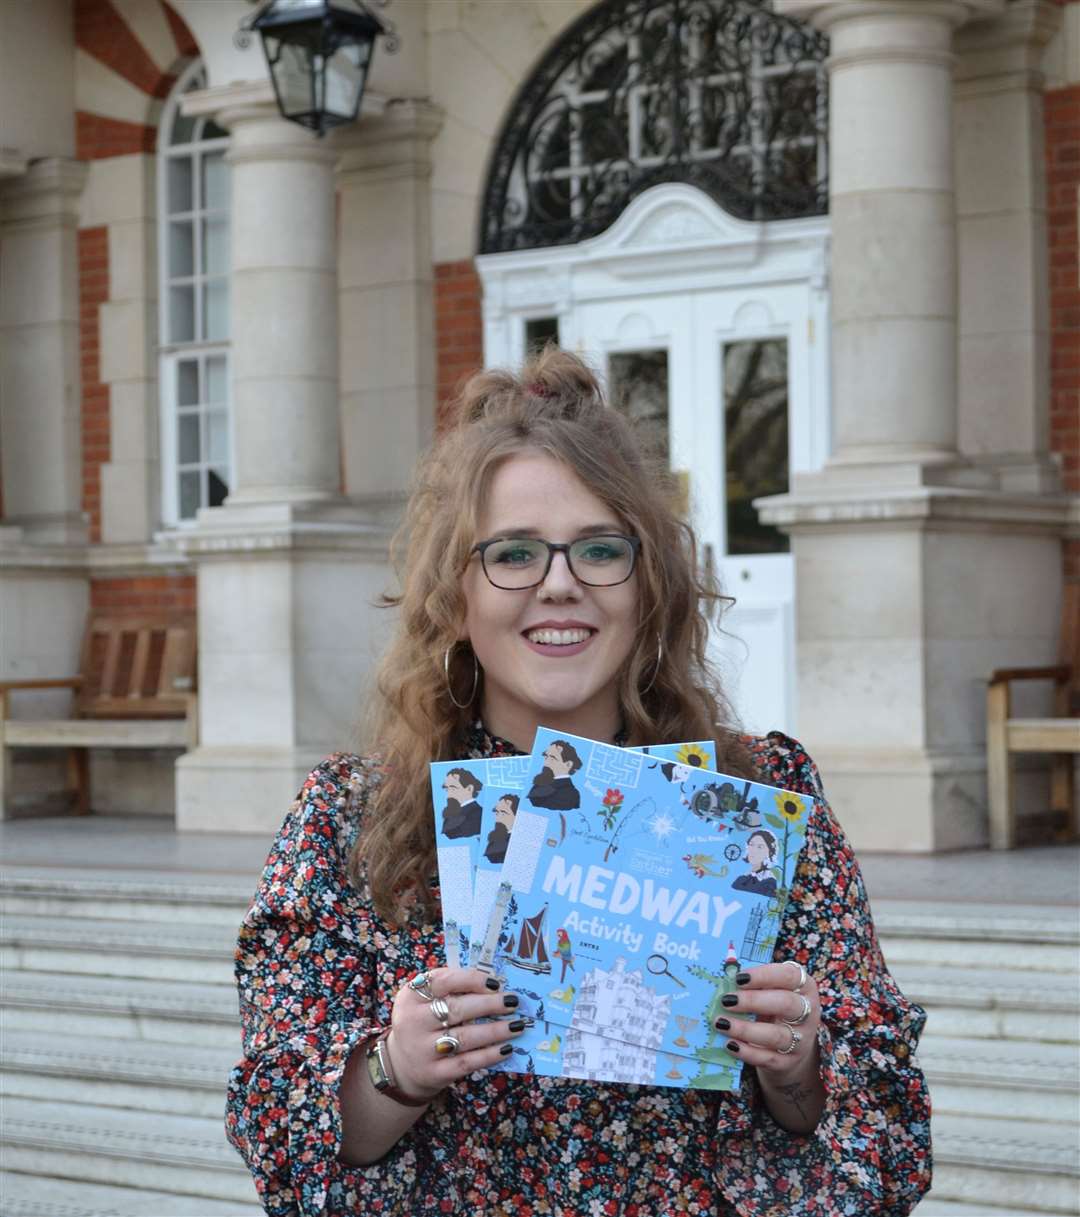 Award-winning businesswoman Esther Johnson with her The First Ever Medway Activity Book